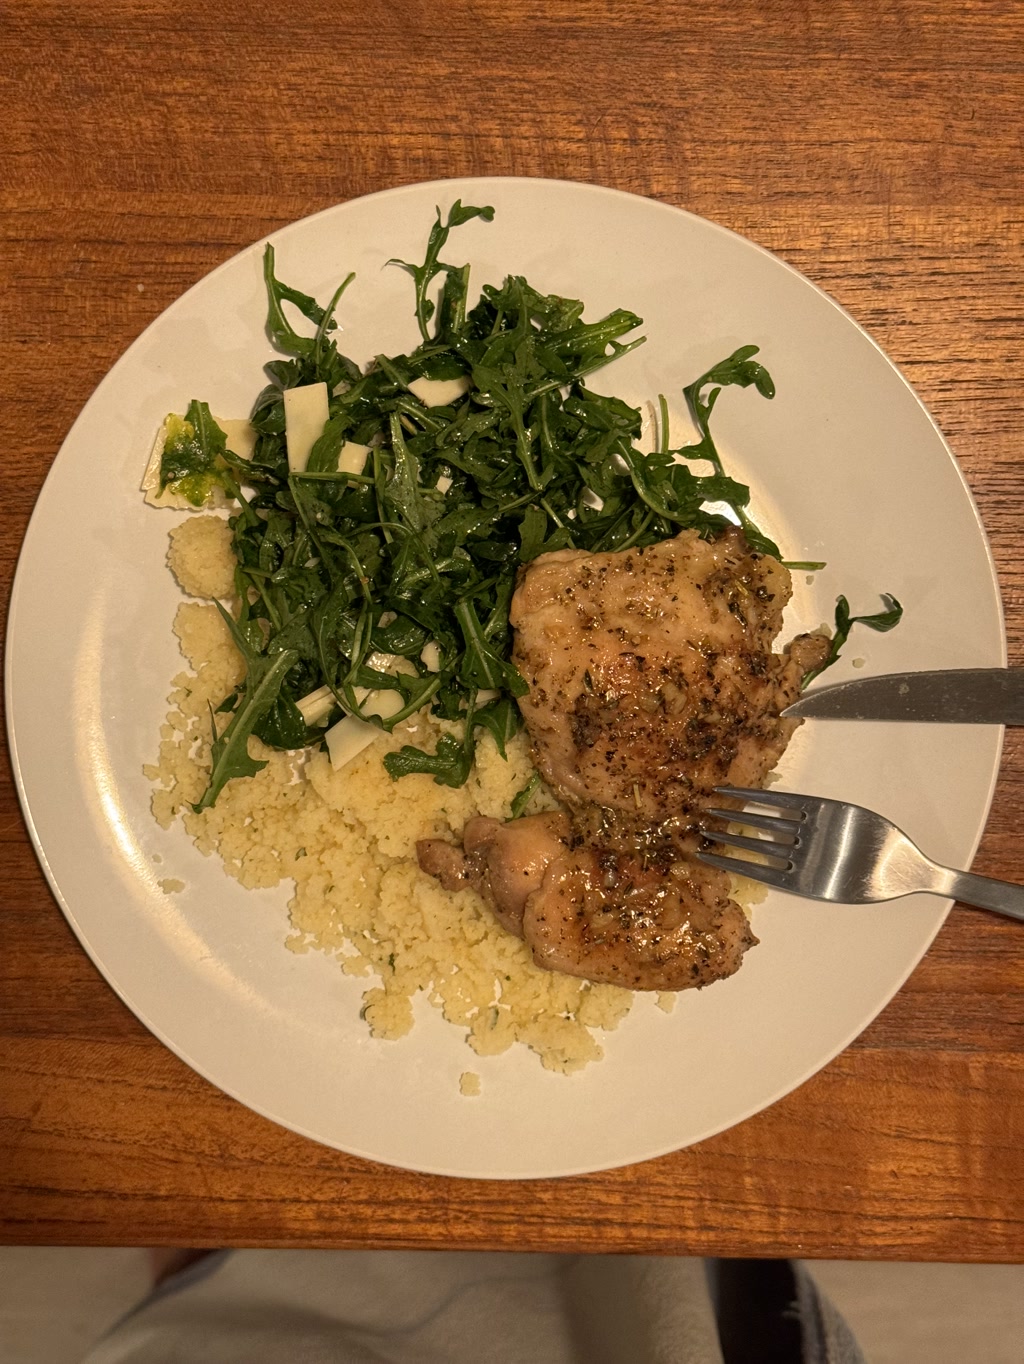 A plate of food featuring fire garlic miso chicken, a light brown piece of chicken seasoned with visible spices, accompanied by a fluffy bed of pale yellow couscous, and a side of arugula salad dressed and mixed with what appears to be pieces of parmesan cheese, adding hints of white to the green leaves. The food is presented on a round white plate, resting on a wooden table. A fork is placed to the right of the chicken, partially resting on the couscous. The plate offers a wholesome and nutritious meal with a balance of protein, grains, and greens.